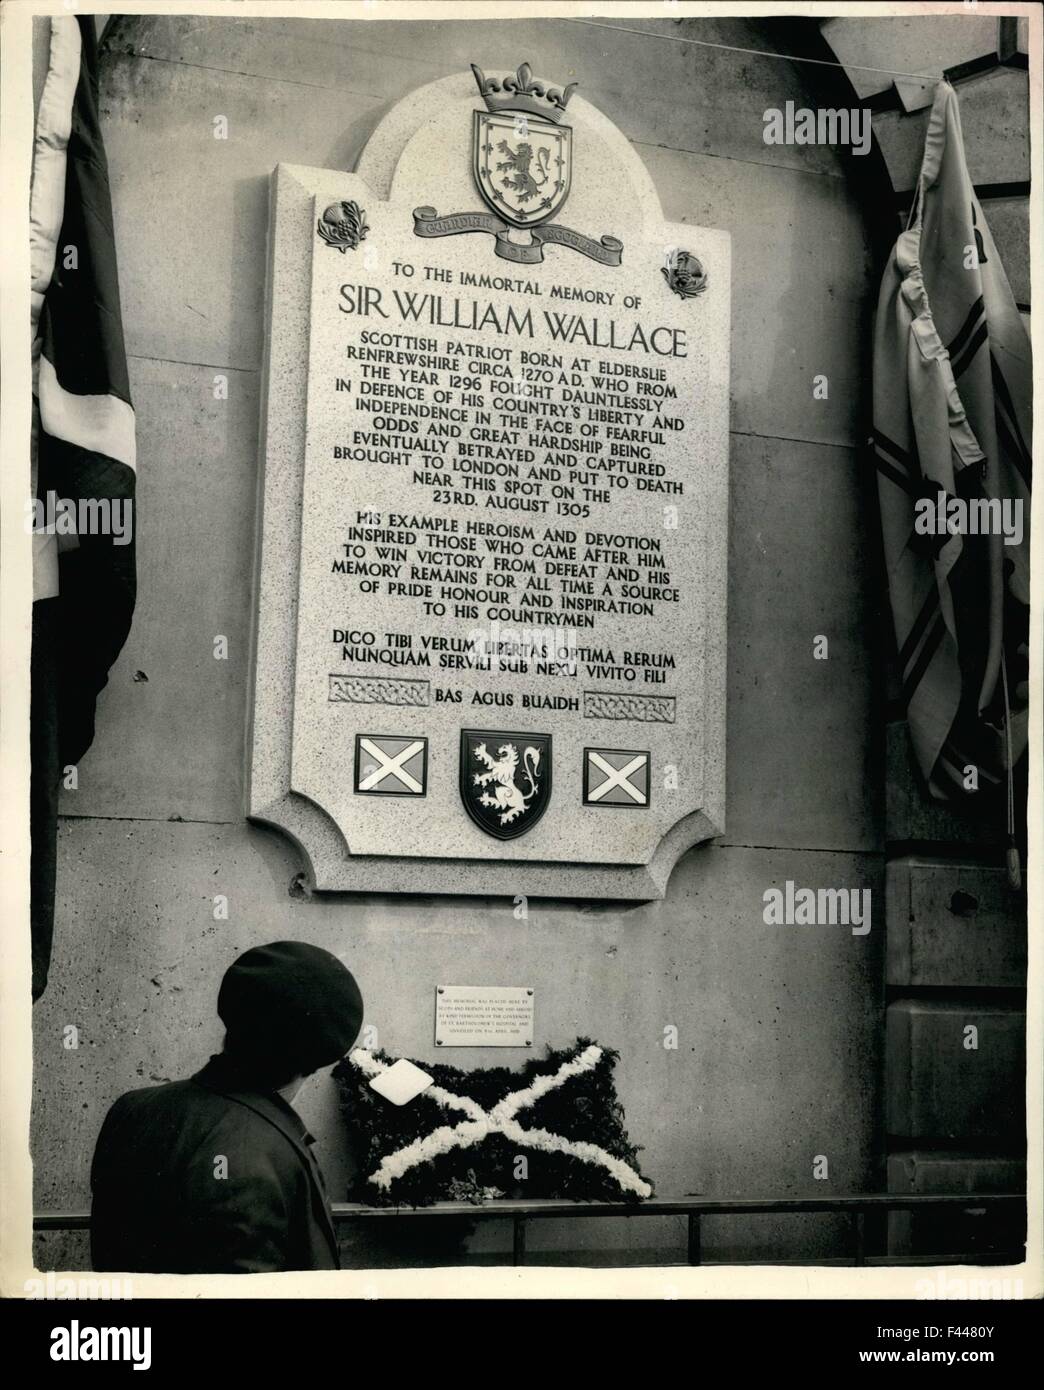 Feb. 24, 1959 - Unveiling Of Memorial Tablet To Sir William Wallace: A memorial tablet to Sir William Wallace the Scottish Patriot, was unveiled by the Countess of Dundee this afternoon. The tablet is set in a panel in the wall of St.Bartholomew's Hospital, near where he was executed 651 years ago. Photo Shows: View of the tablet after today's ceremony. © Keystone Pictures USA/ZUMAPRESS.com/Alamy Live News Stock Photo